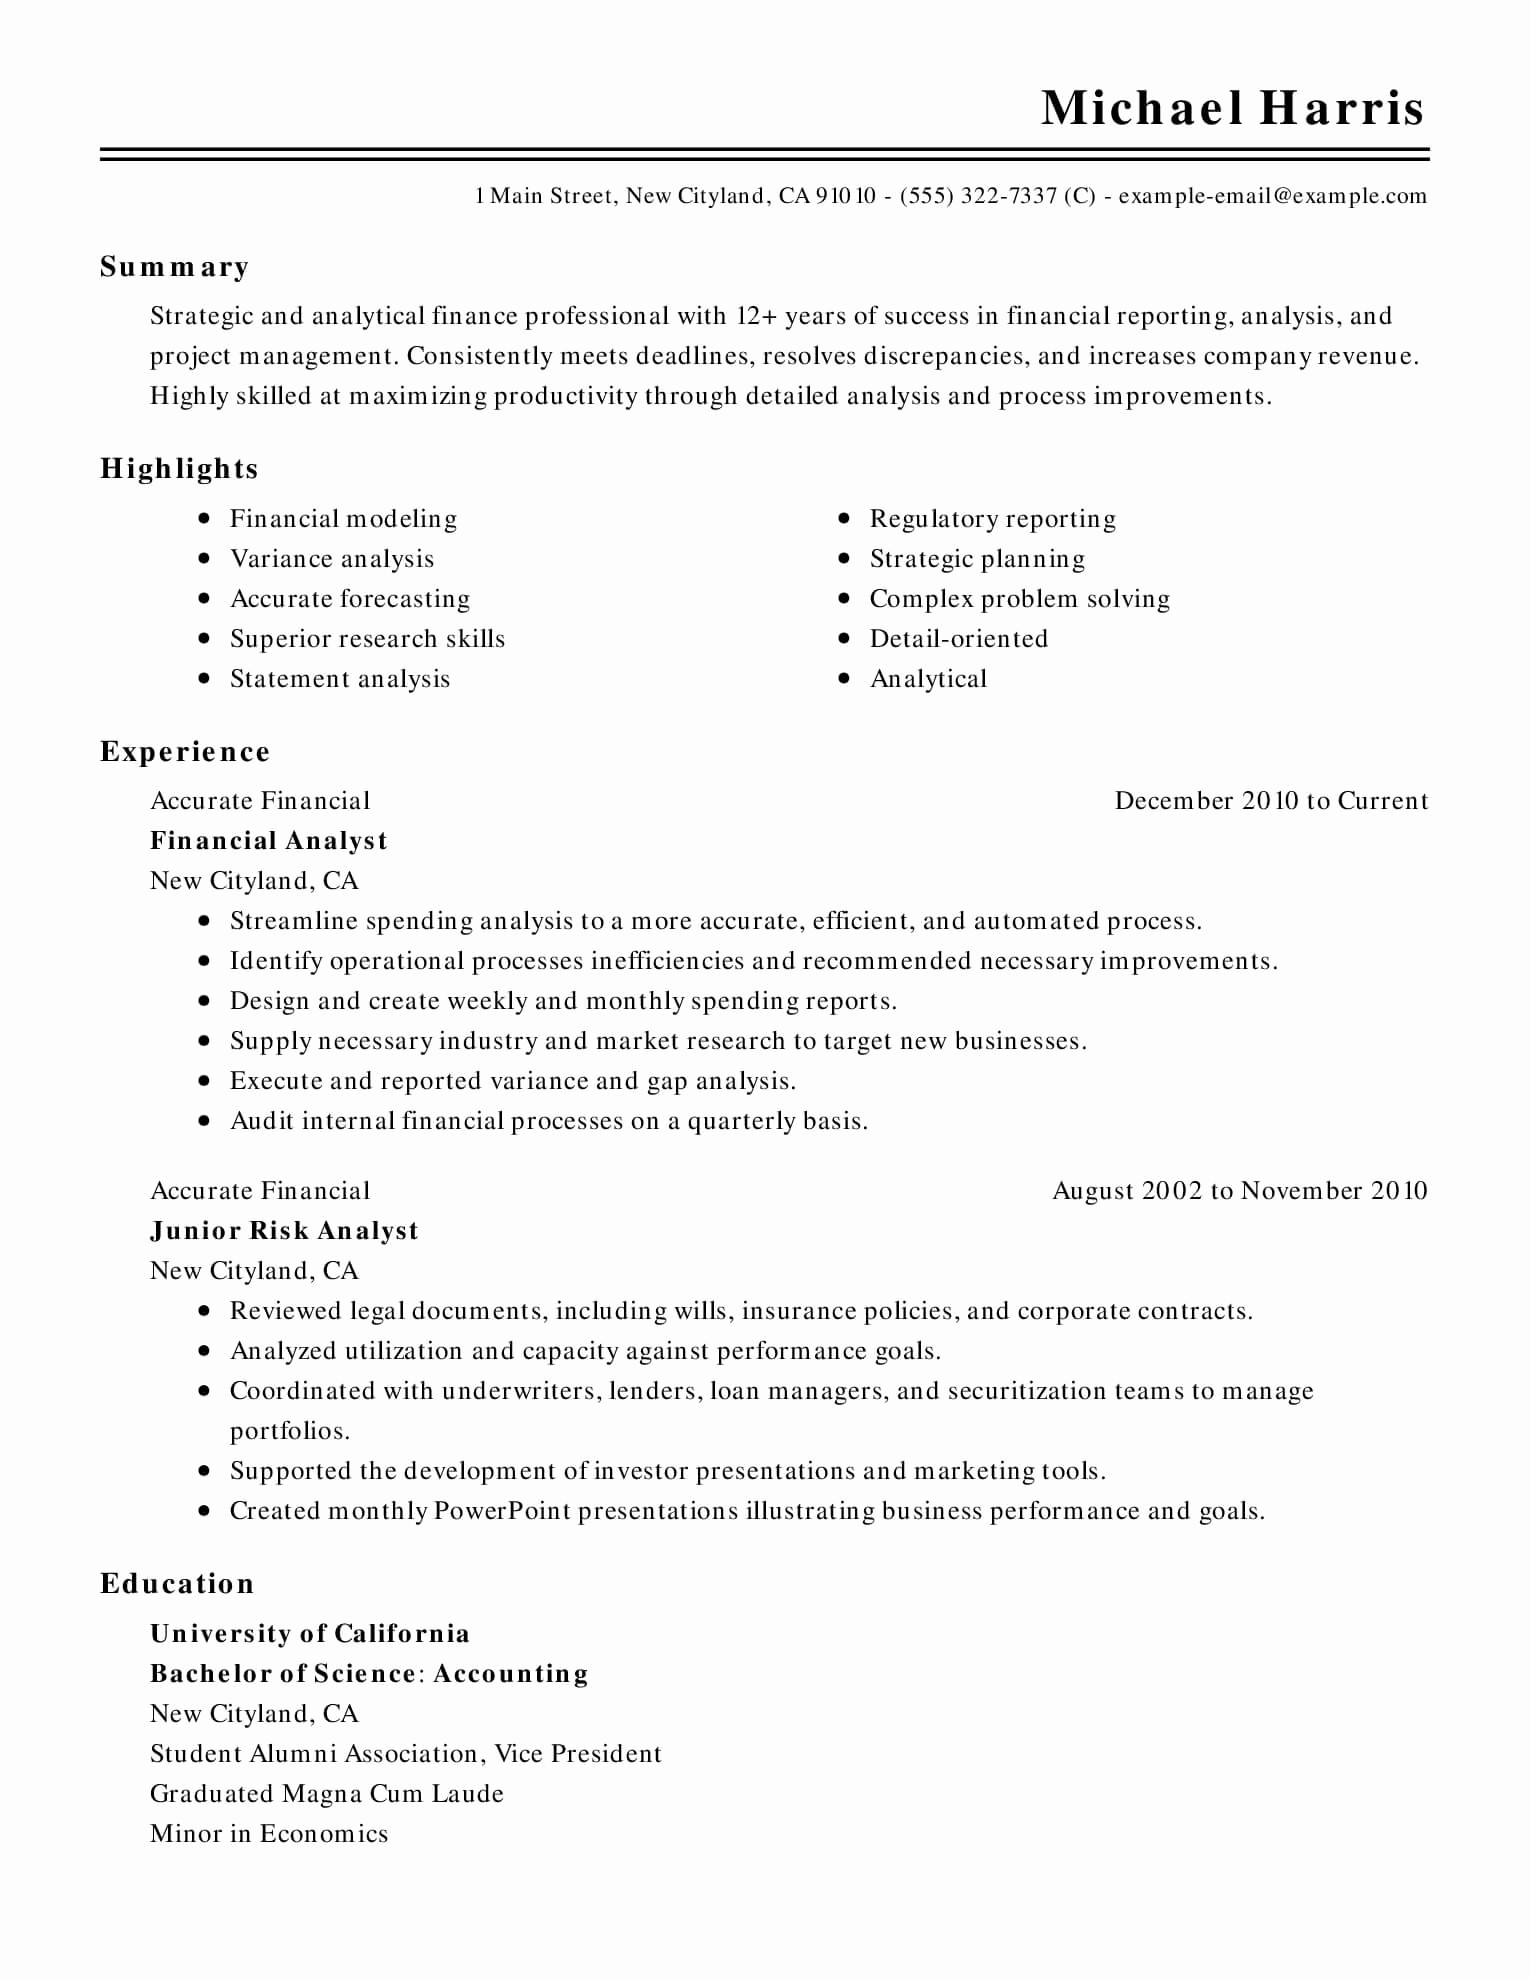 Resume Template for Microsoft Word Awesome 15 Of the Best Resume Templates for Microsoft Word Fice